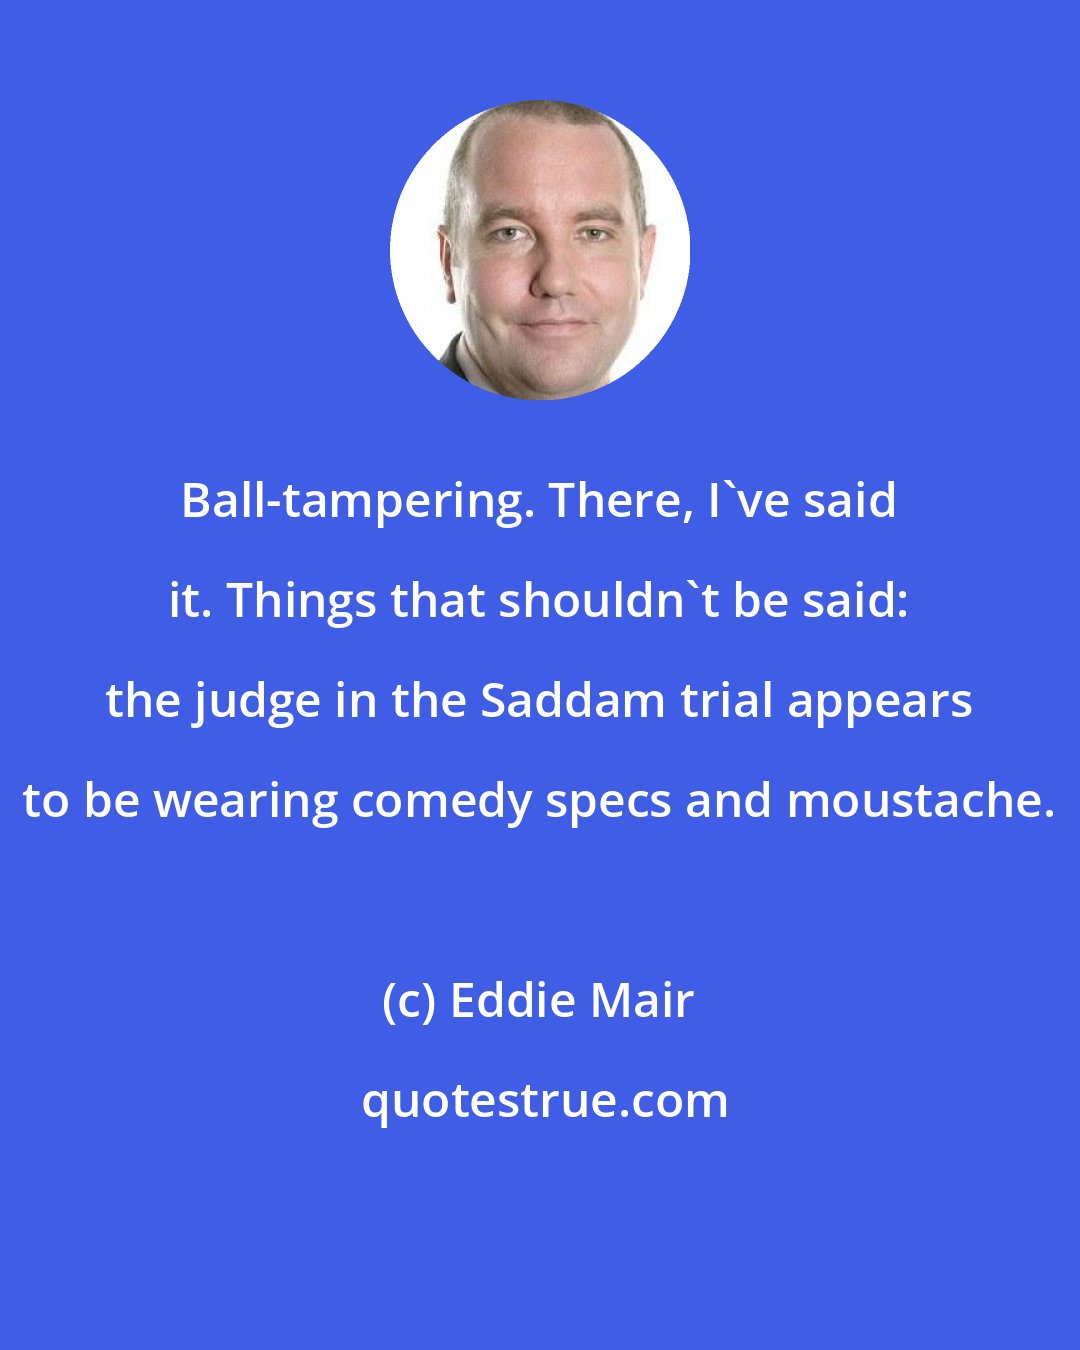 Eddie Mair: Ball-tampering. There, I've said it. Things that shouldn't be said: the judge in the Saddam trial appears to be wearing comedy specs and moustache.